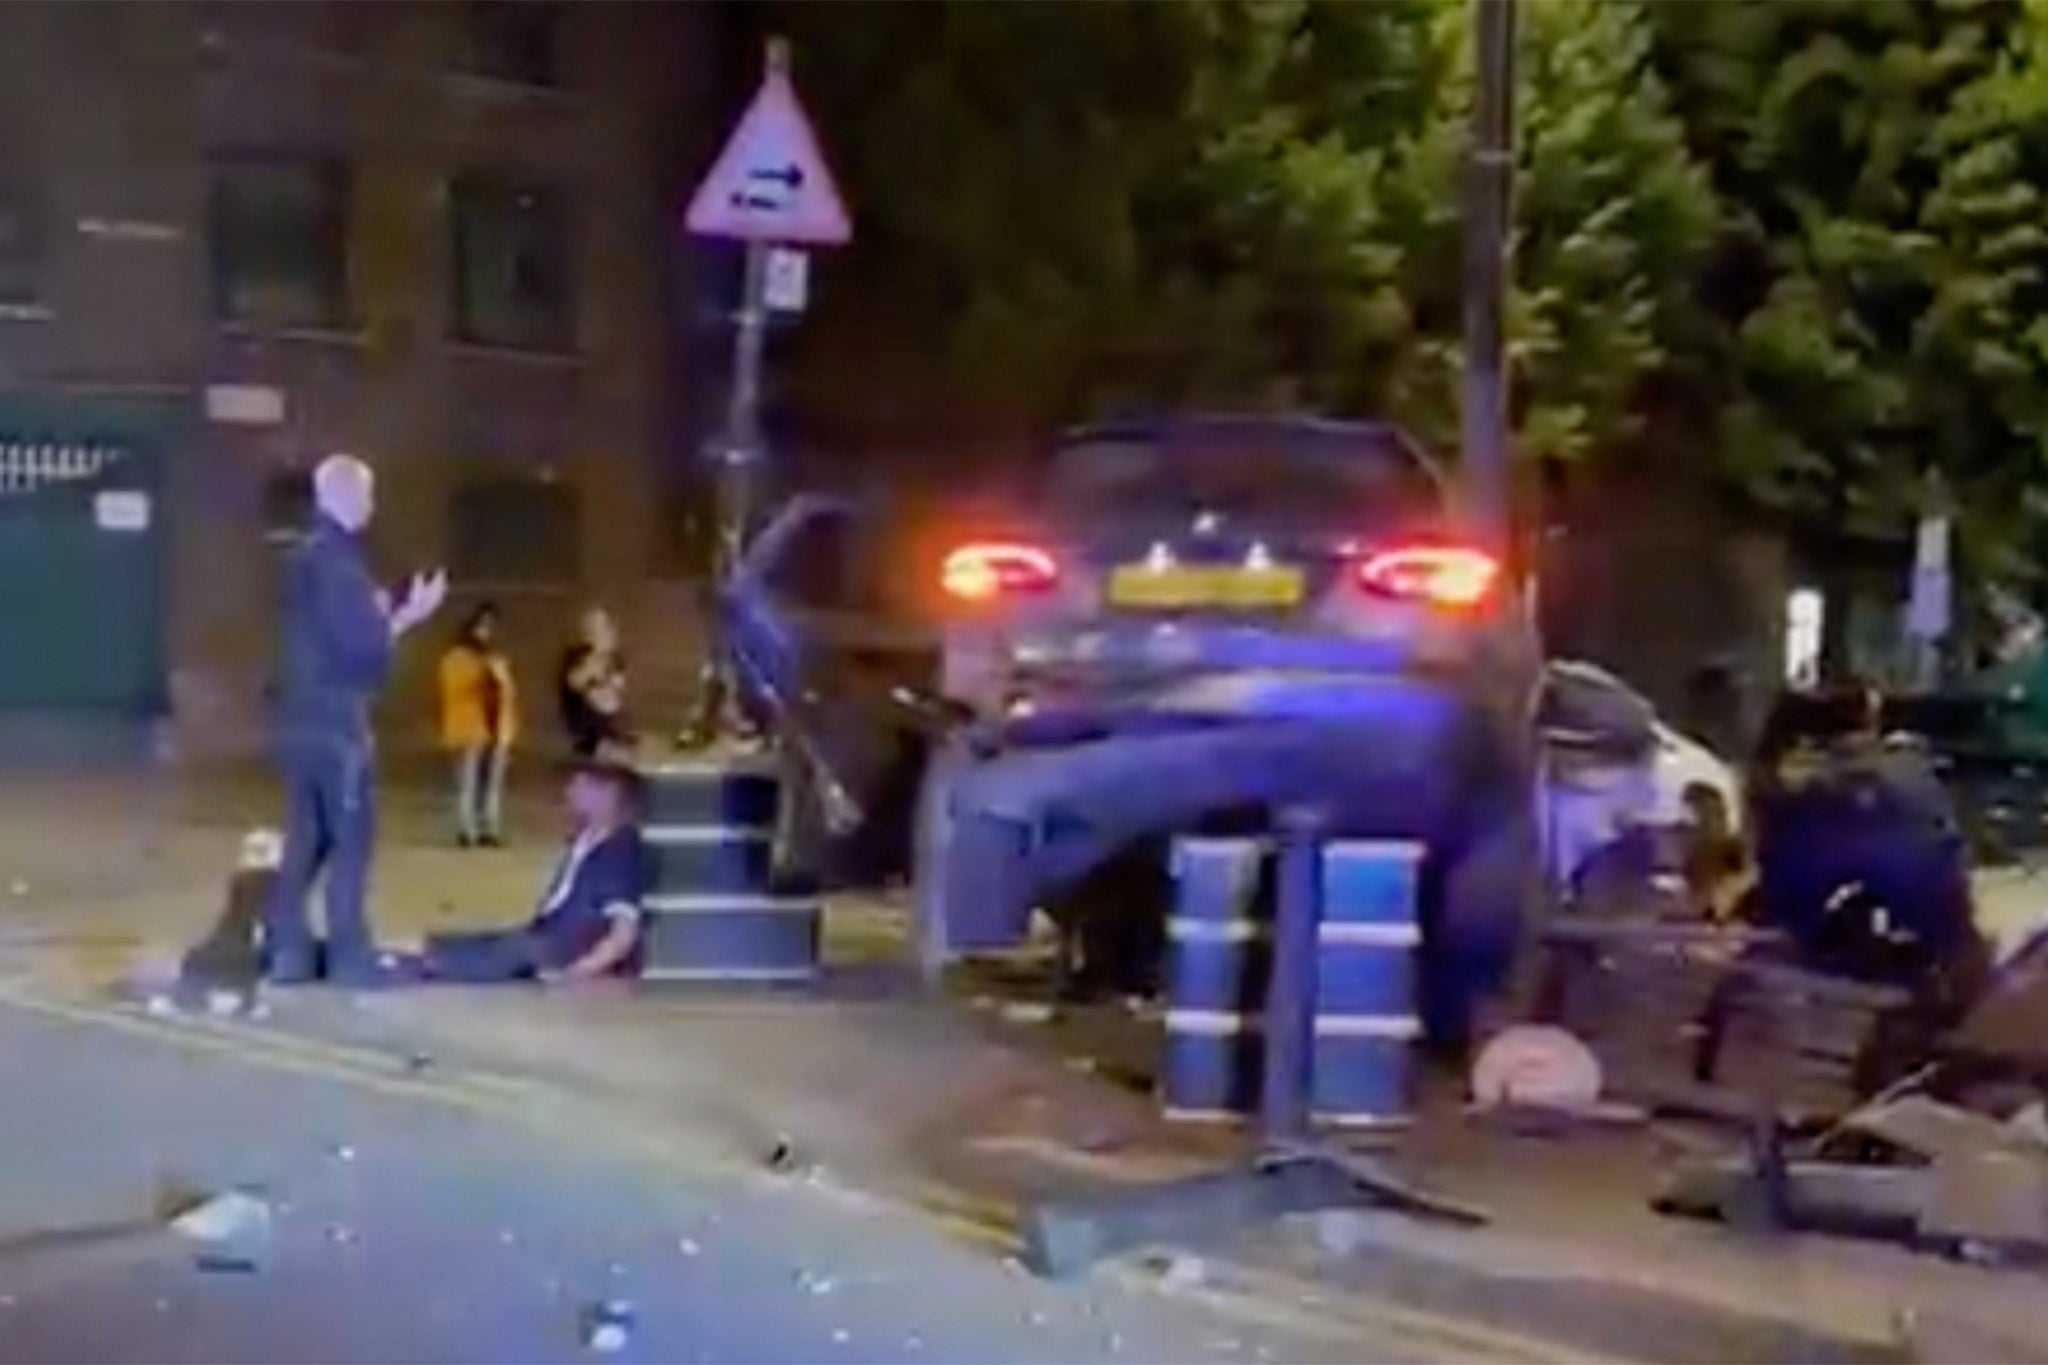 The car failed to stop for police before smashing into a bench